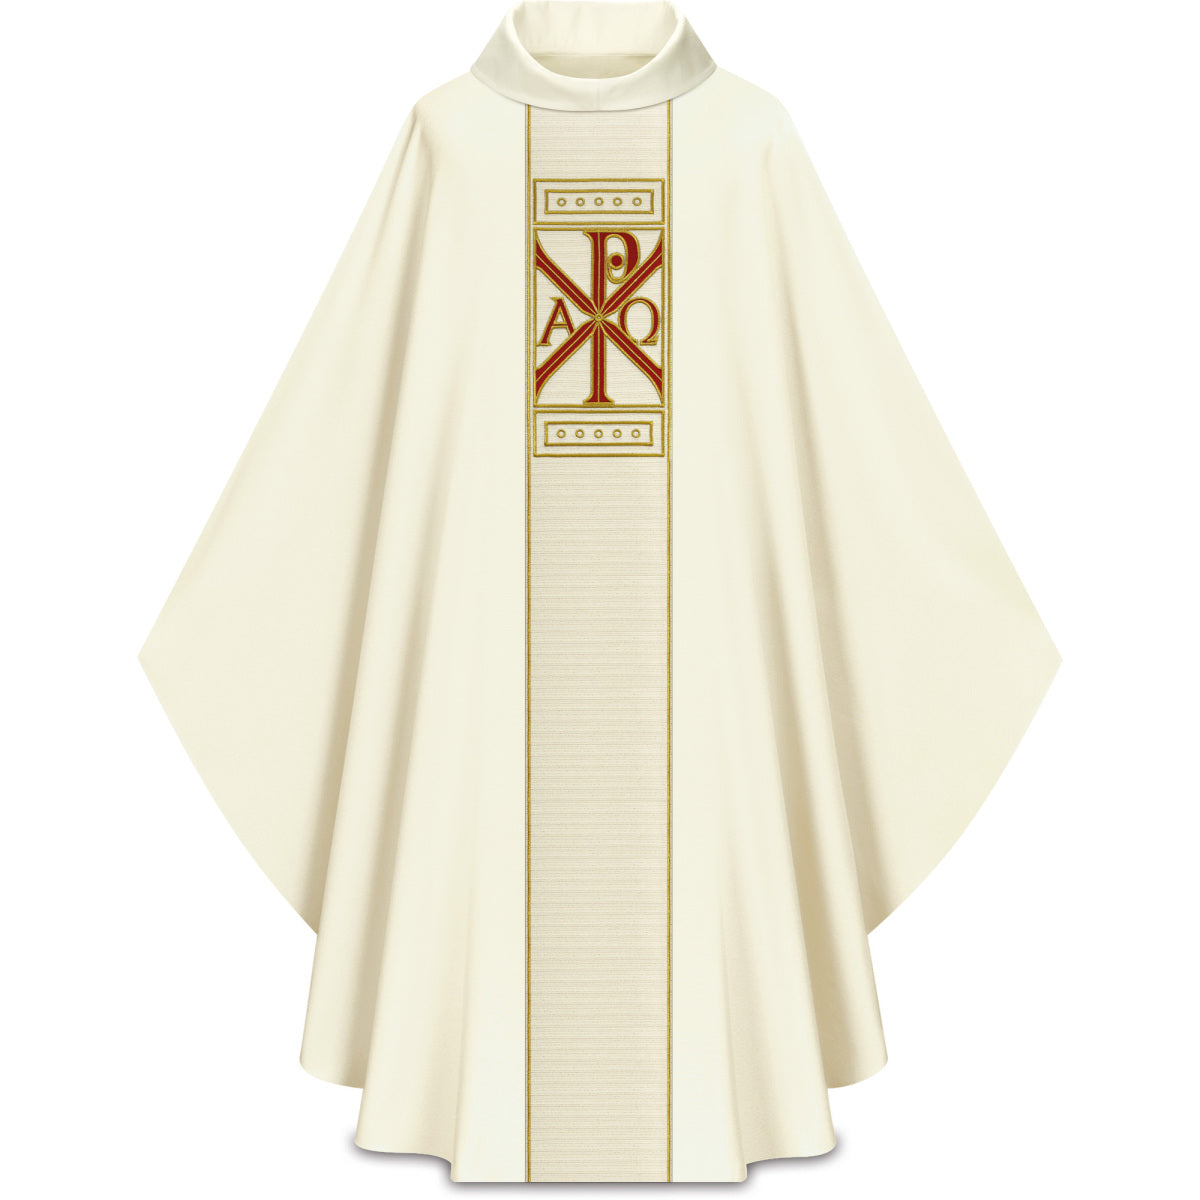 Priest Chasuble | Alpha Omega and Chi Rho